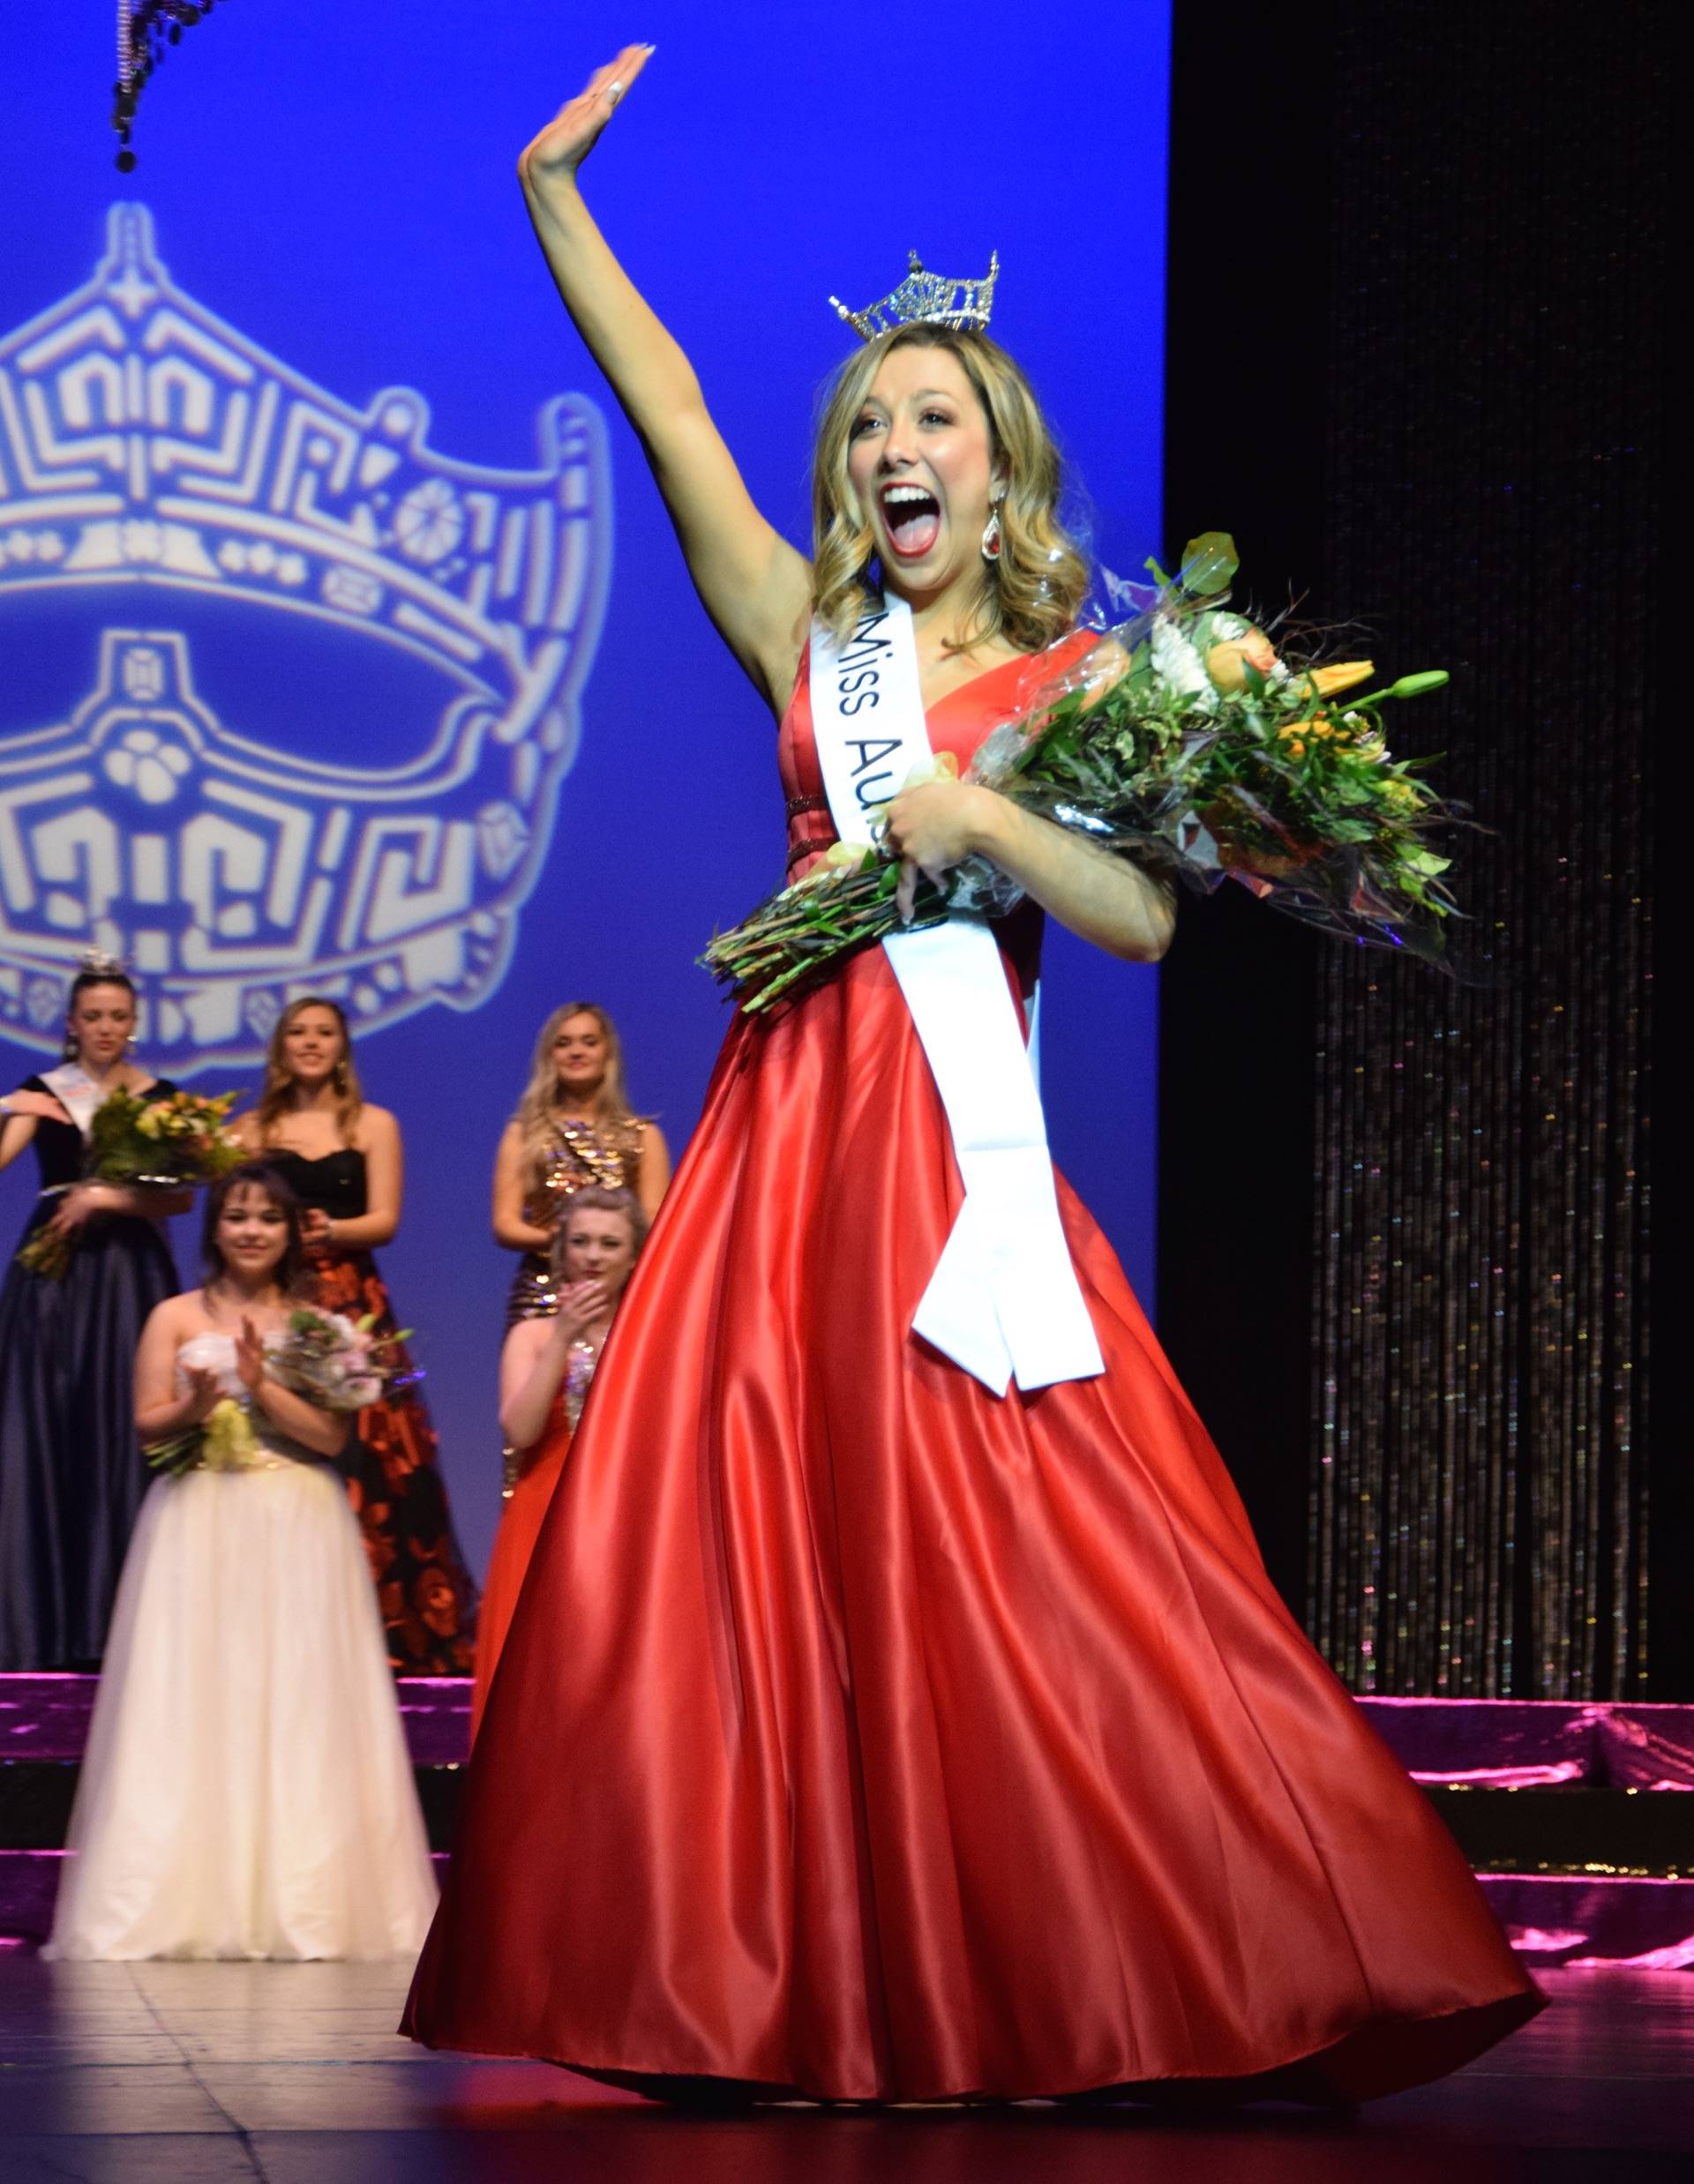 Amanda Enz waves to the audience after being chosen Miss Auburn for 2019 at the scholarship program at the Auburn Performing Arts Center last January. RACHEL CIAMPI, Auburn Reporter